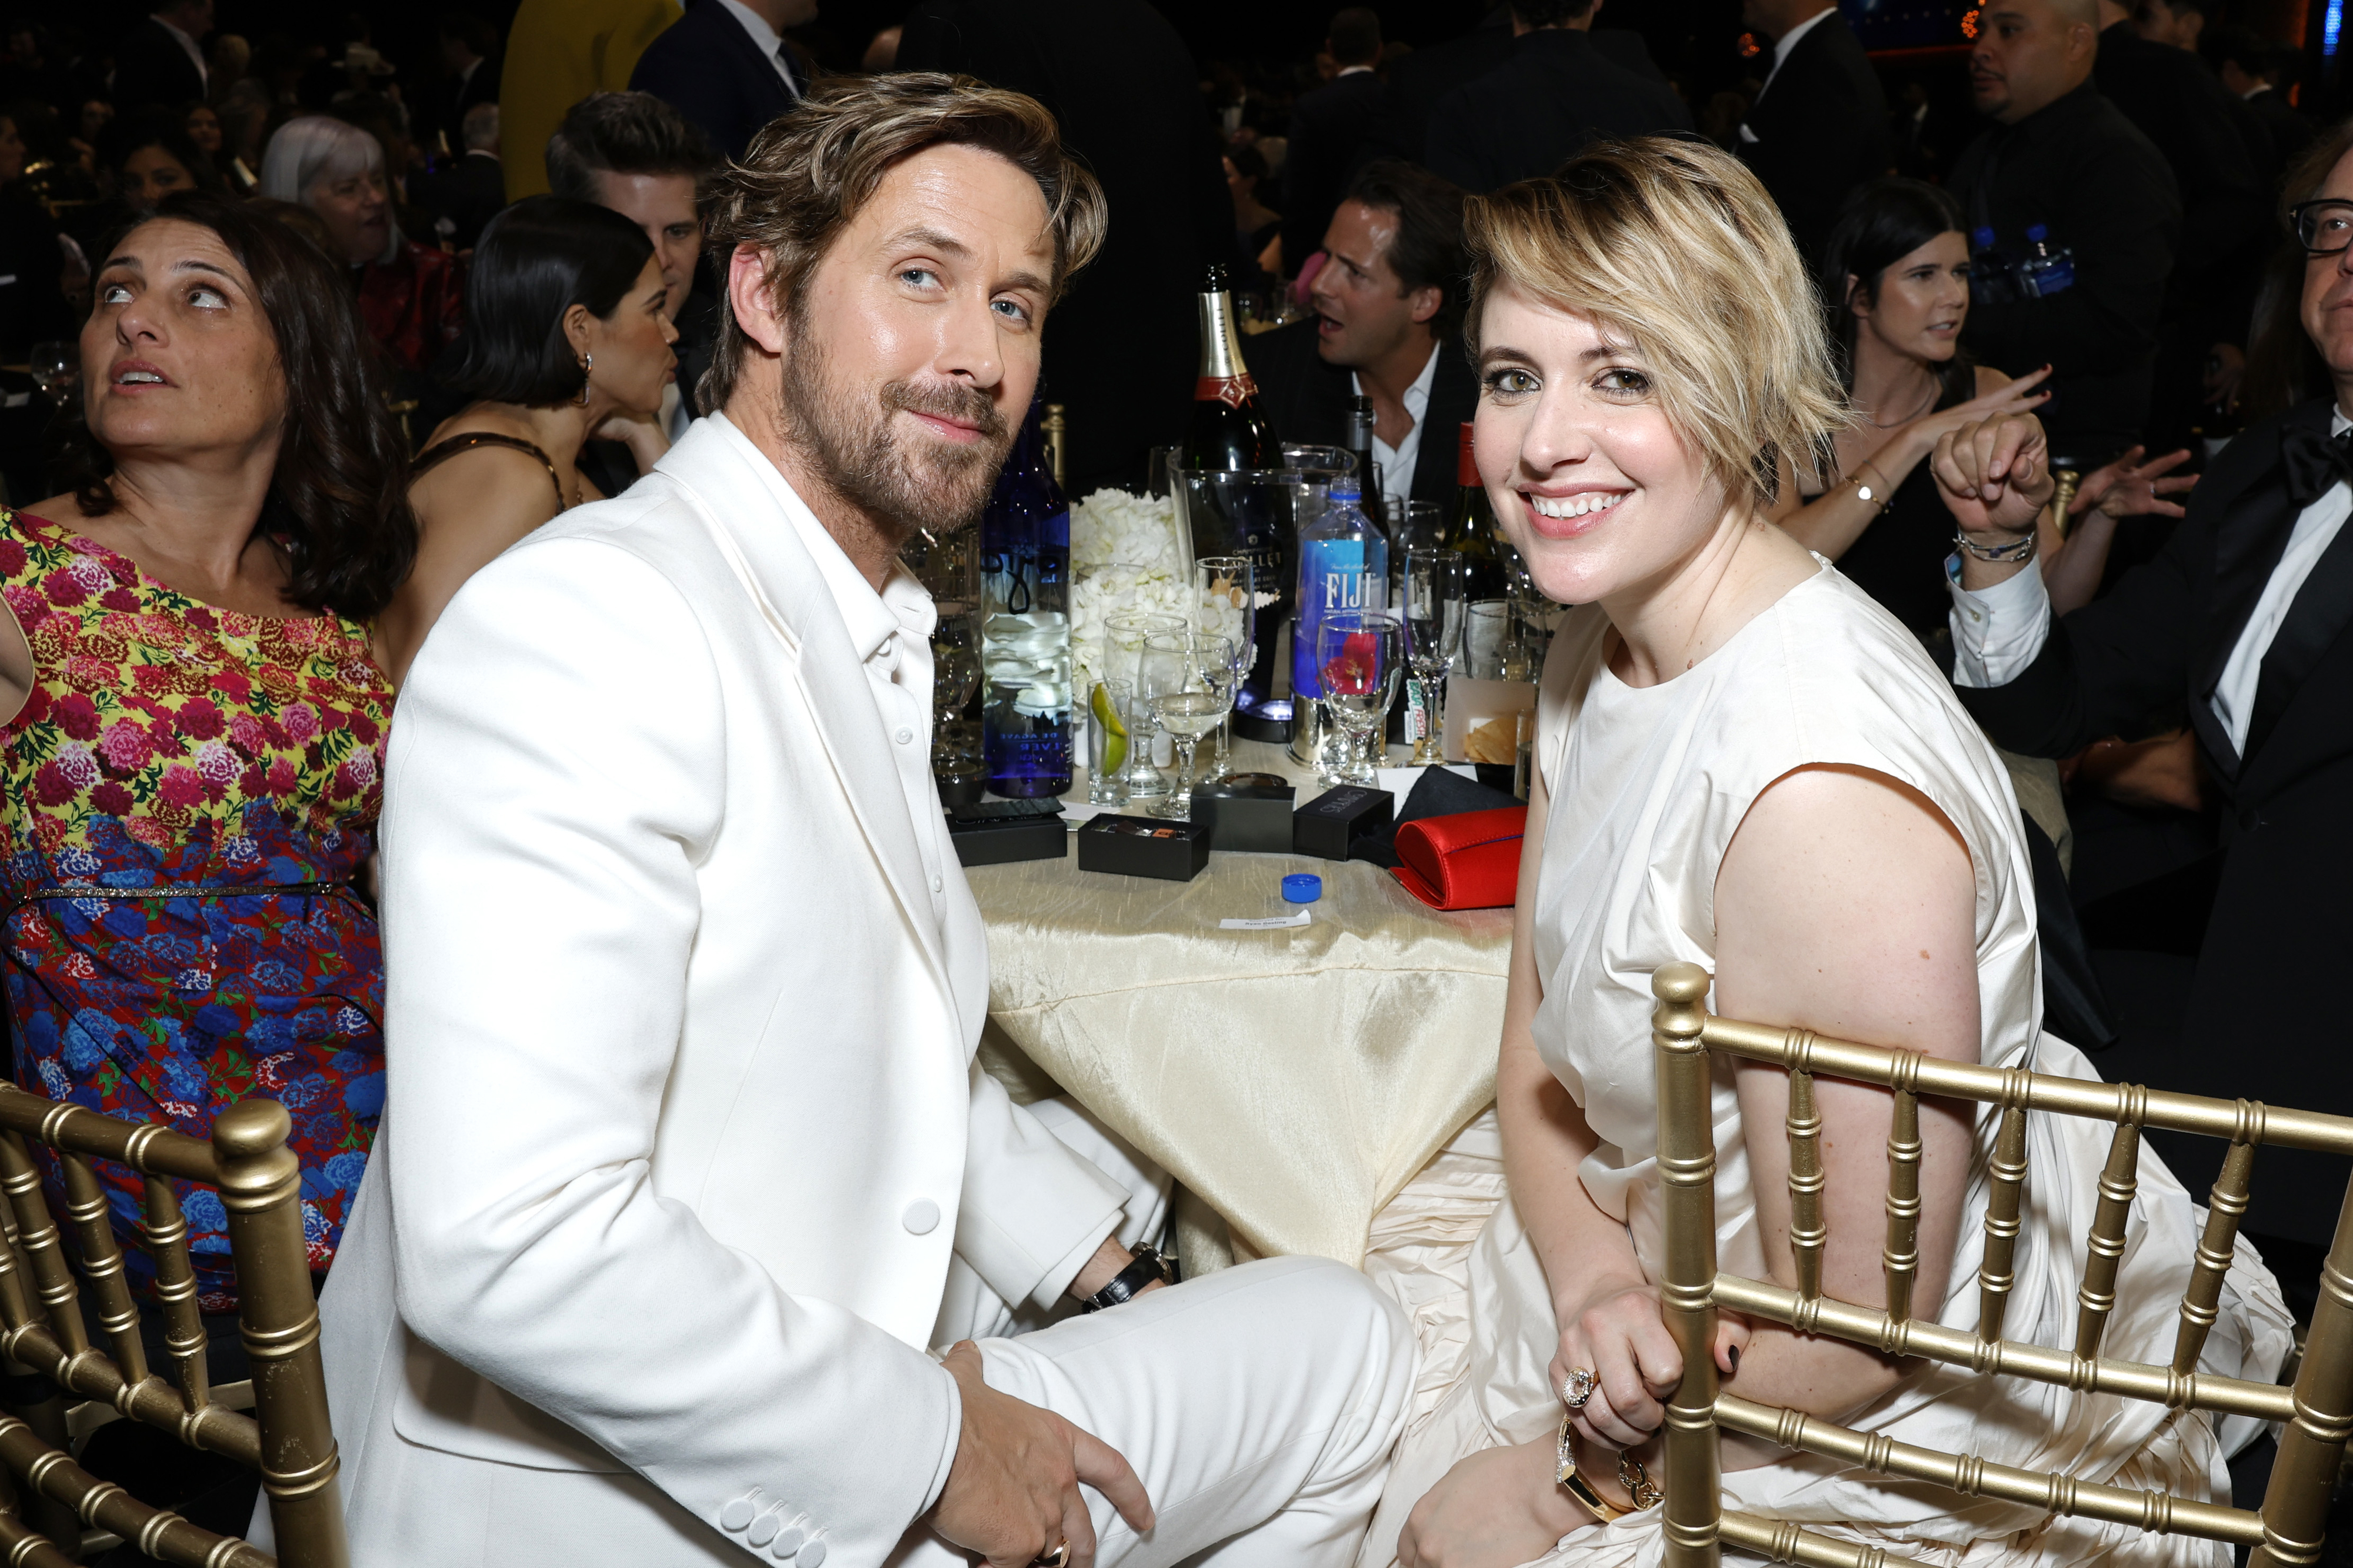 ryan and greta sitting at a table for an awards show